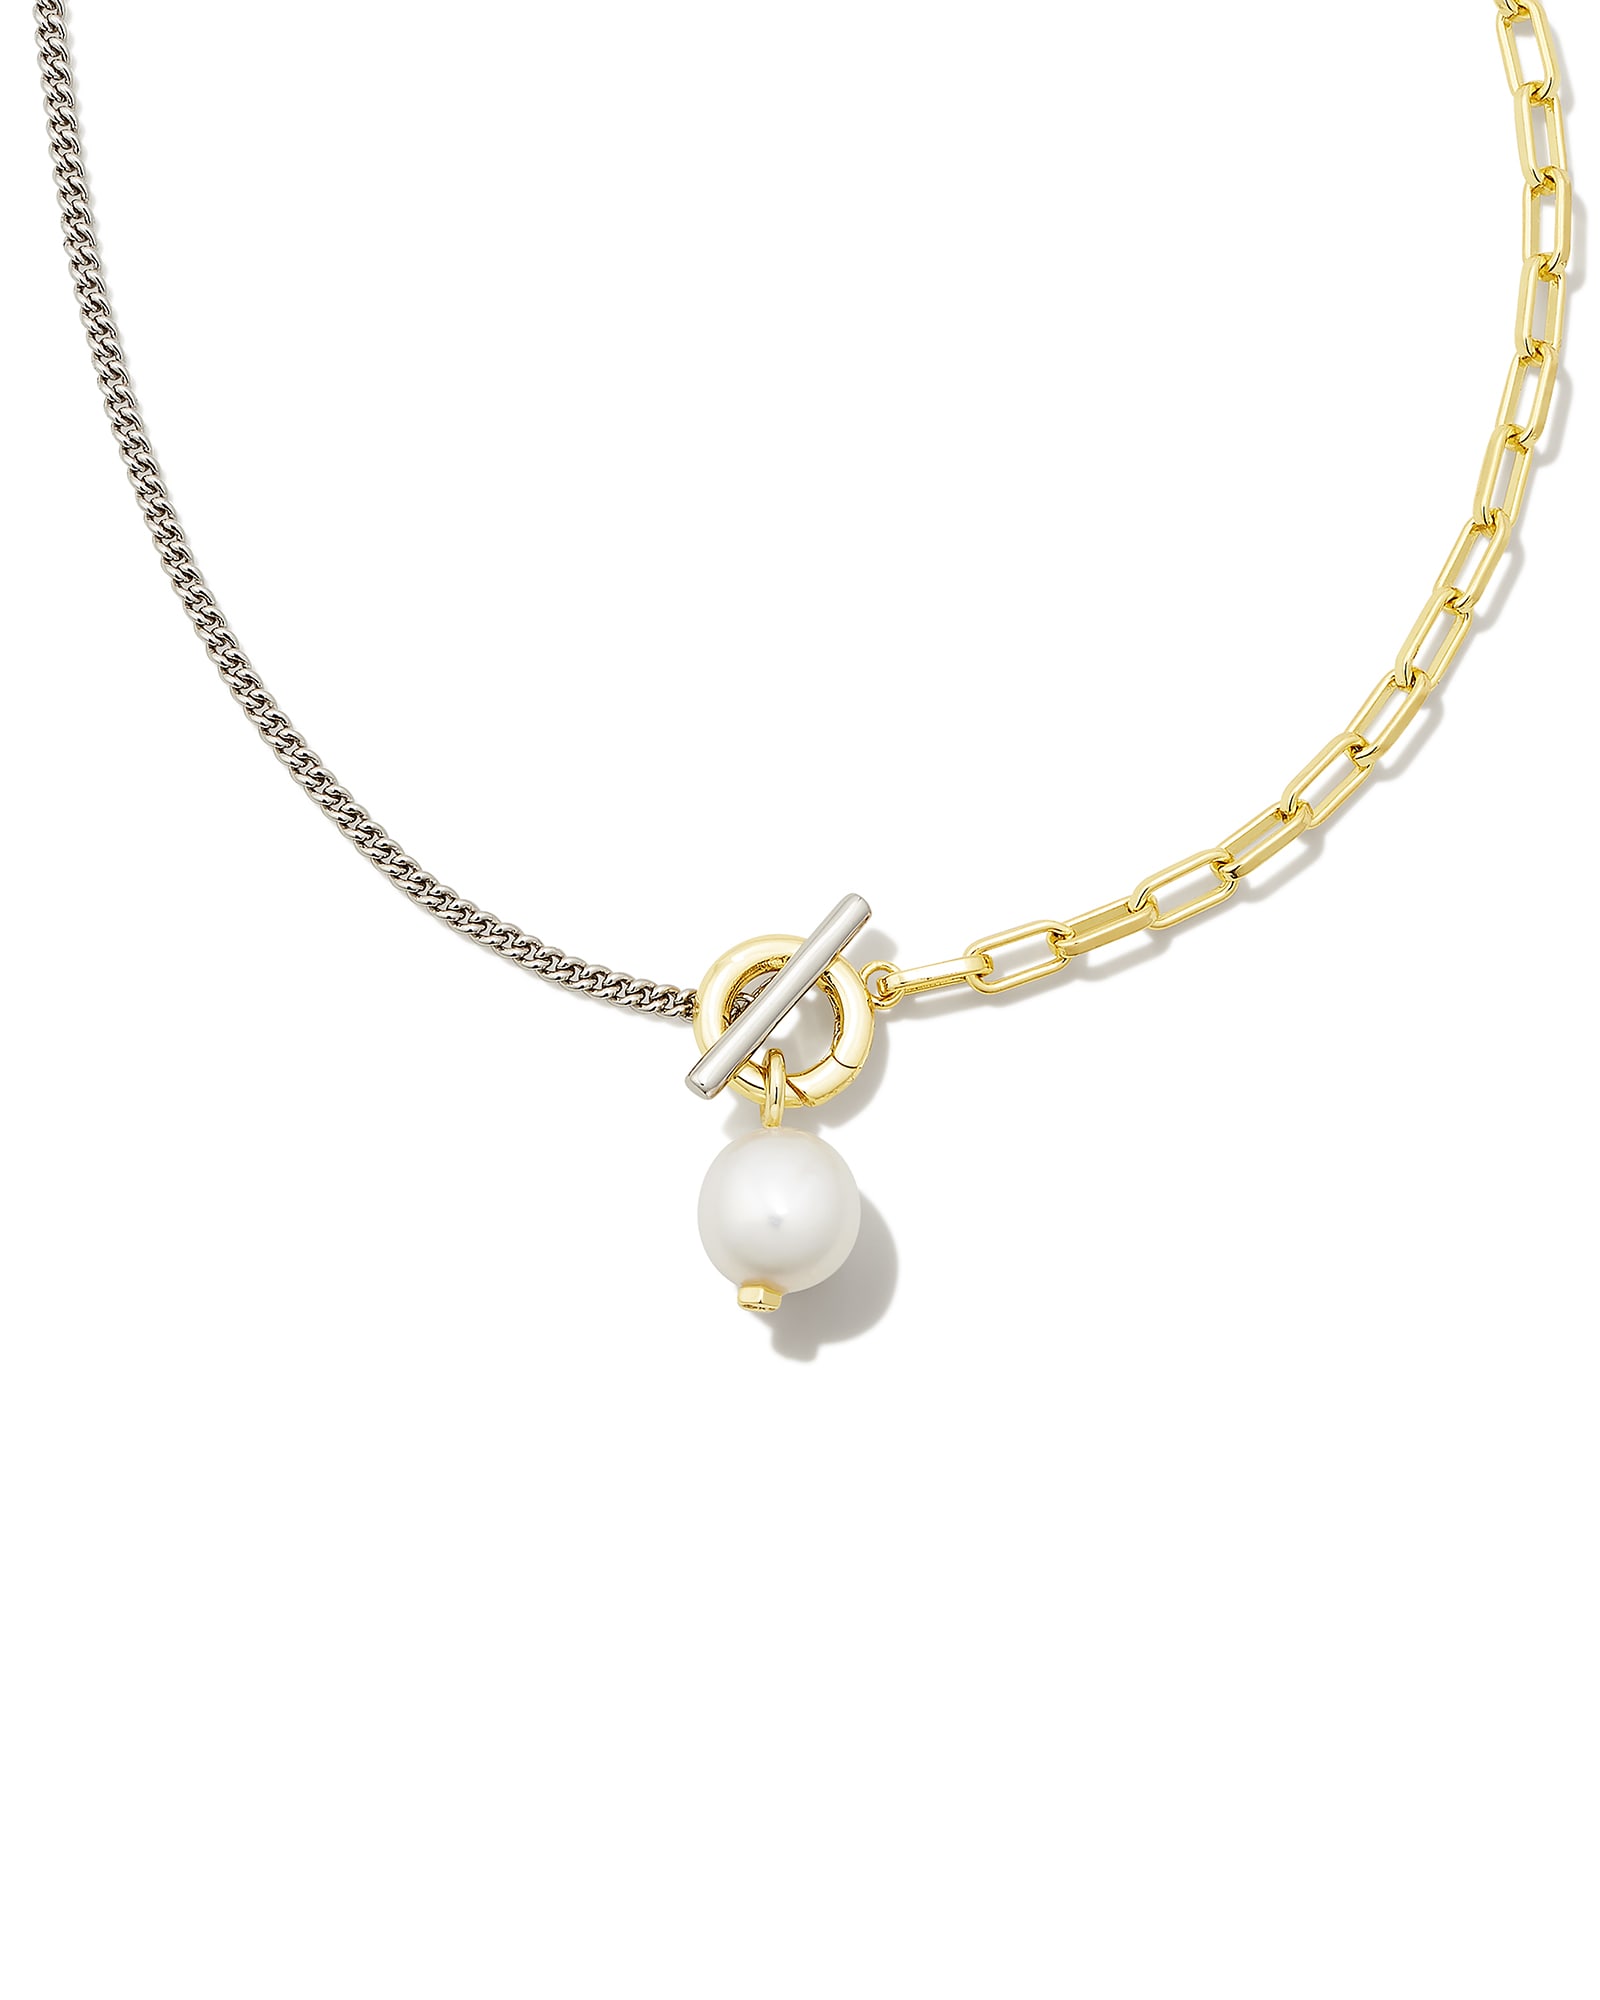 Kendra Scott Leighton Convertible Mixed Metal Pearl Chain Necklace in White Pearl | Pearl/Metal